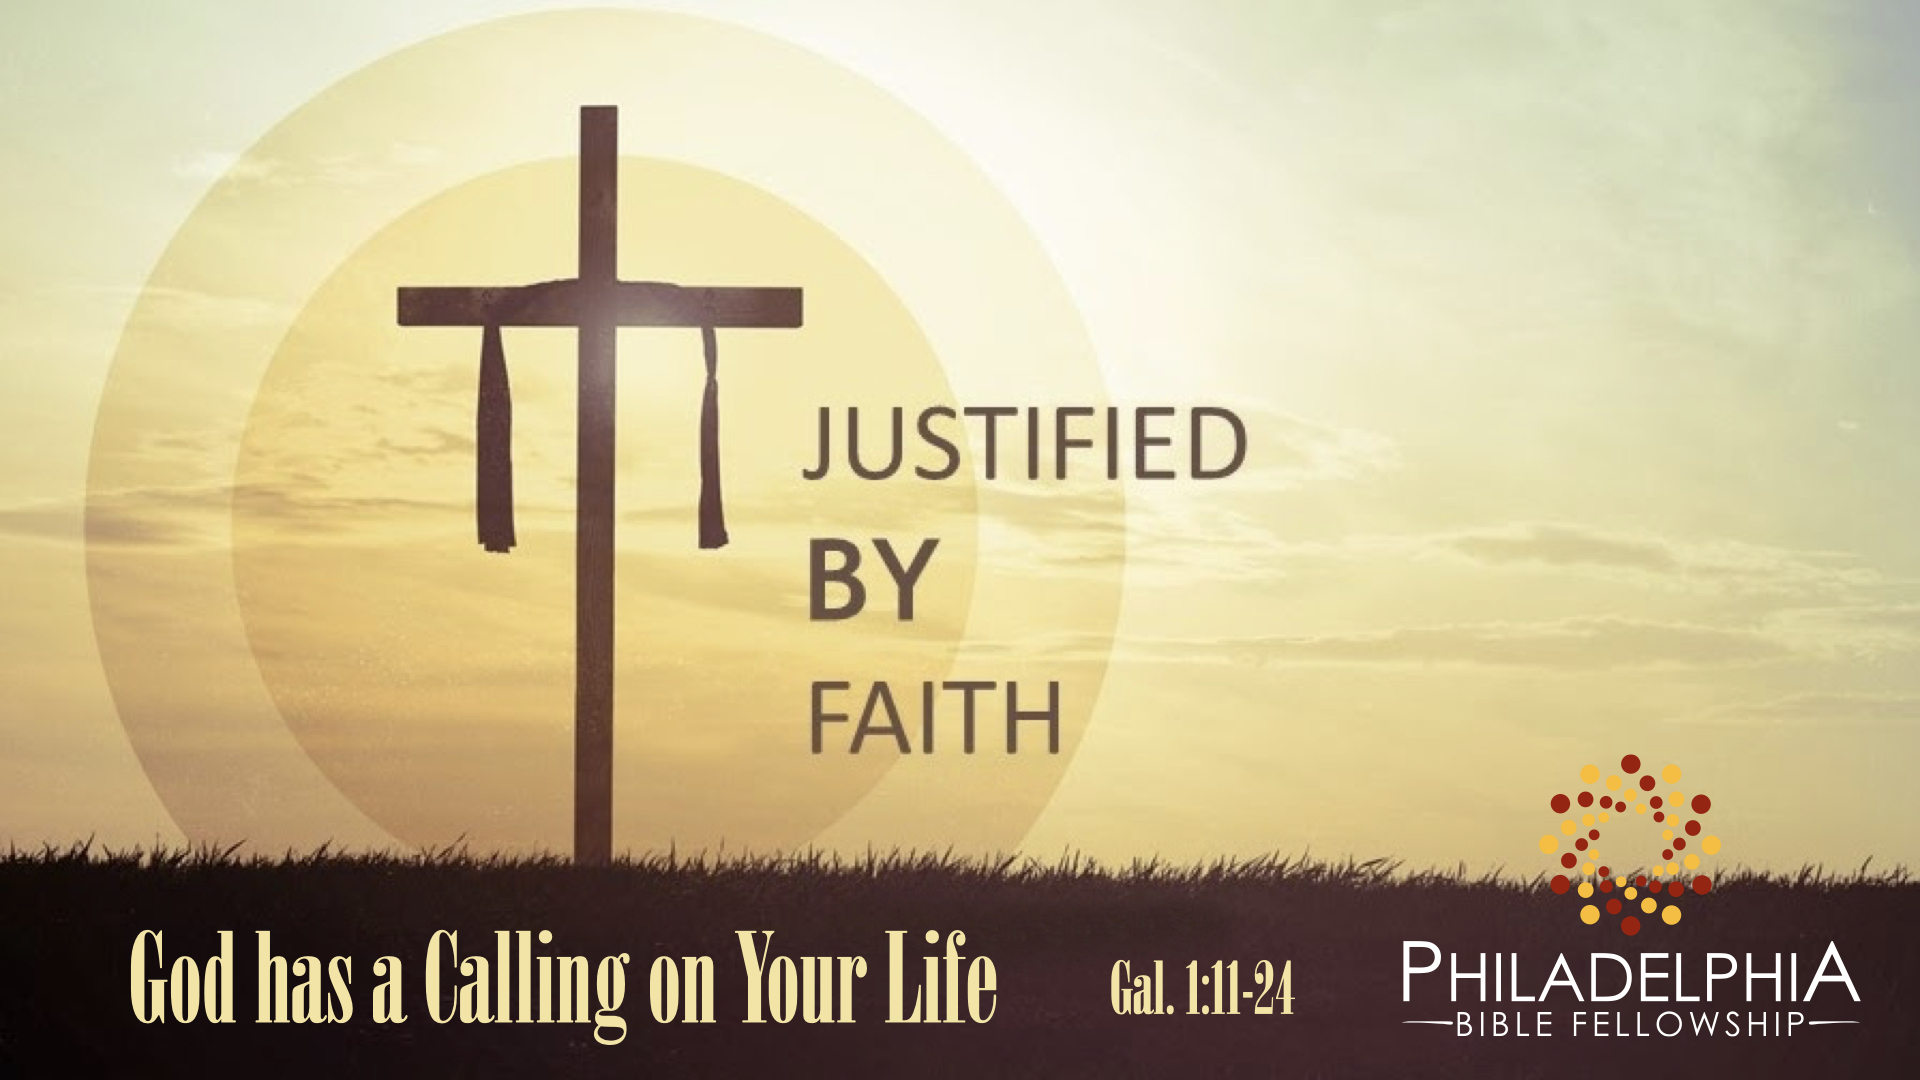 God has a Calling on your Life